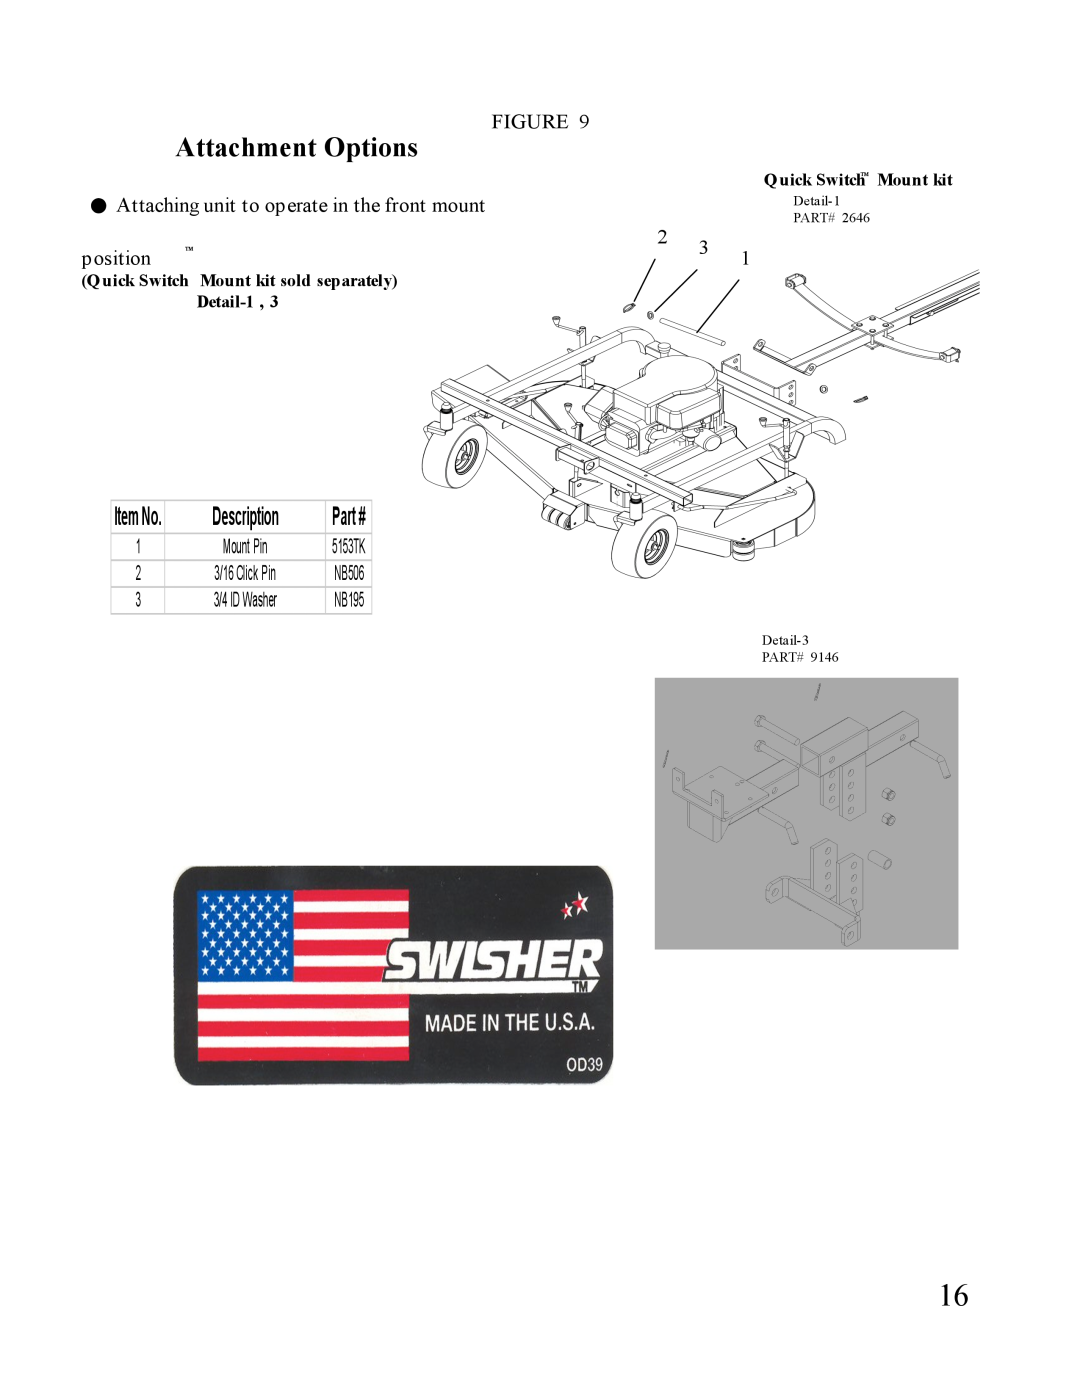 Swisher ONFT1150 Attachment Options, Attaching unit to operate in the front mount, position, Description, Quick Switch 